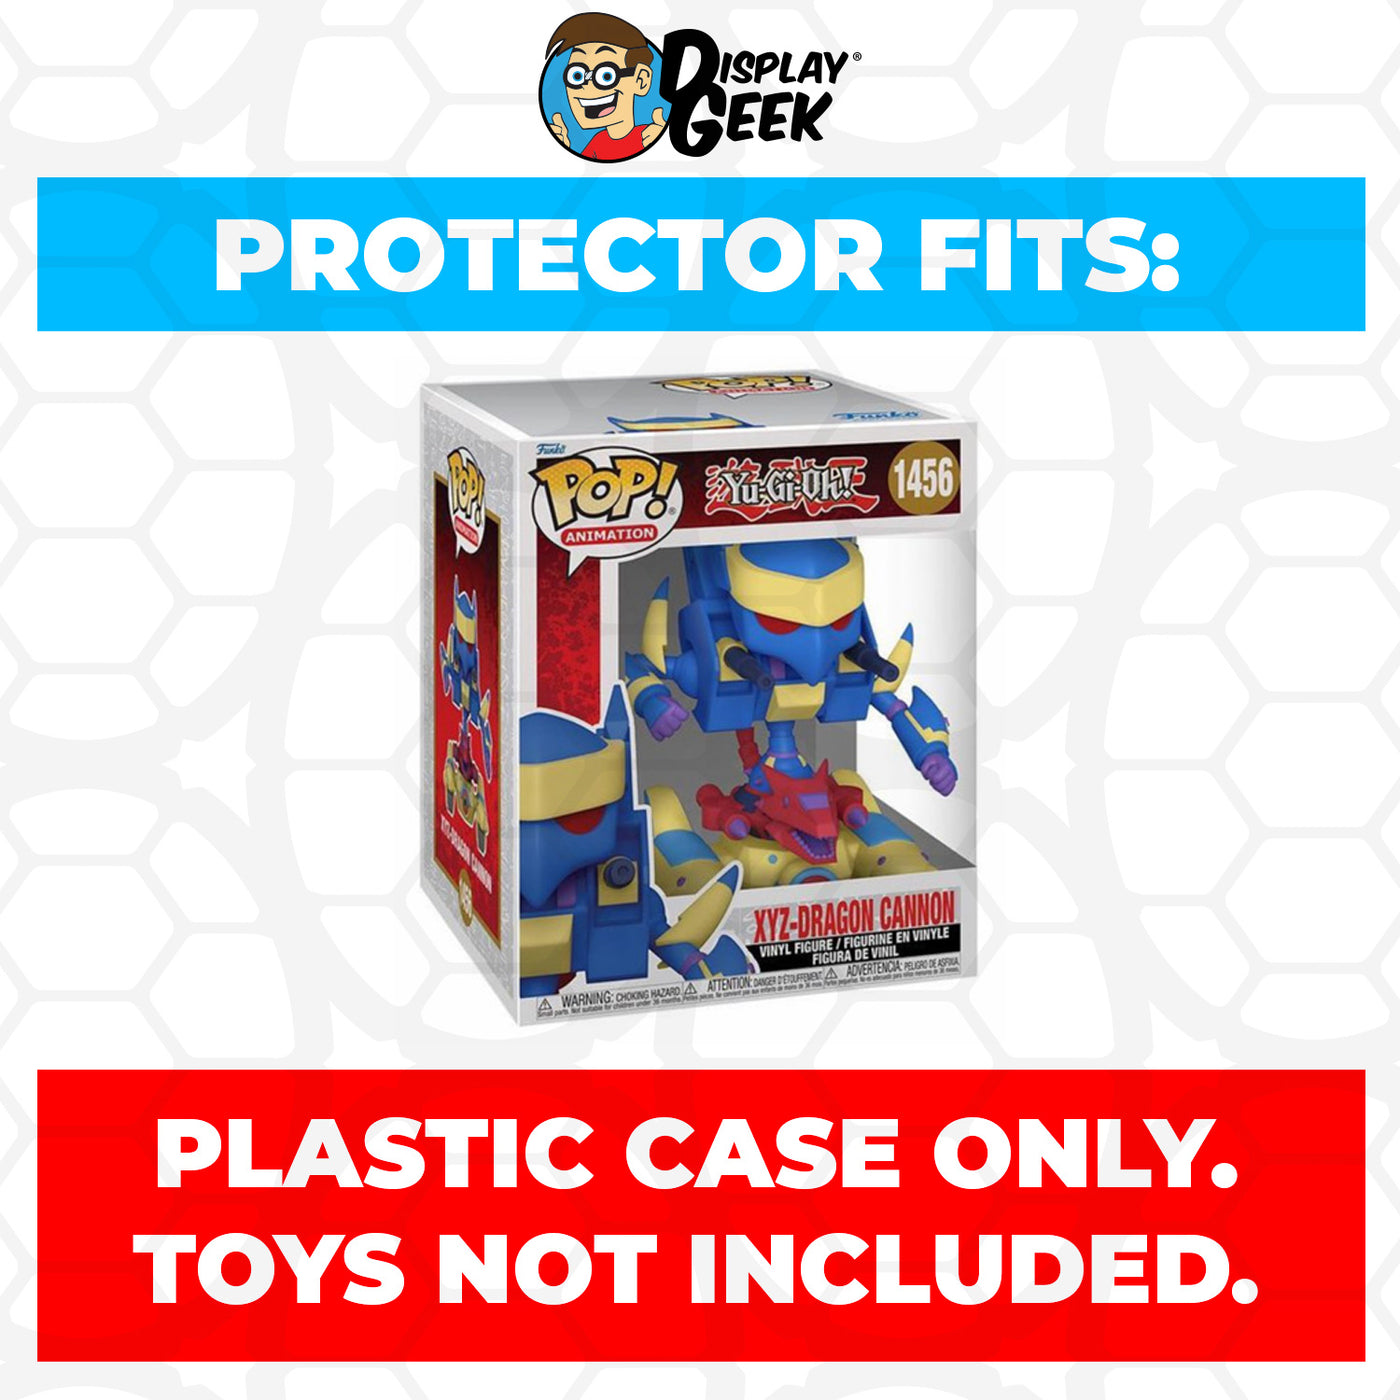 Pop Protector for 6 inch Yu-Gi-Oh! XYZ-Dragon Cannon #1456 Super Size Funko Pop on The Protector Guide App by Display Geek